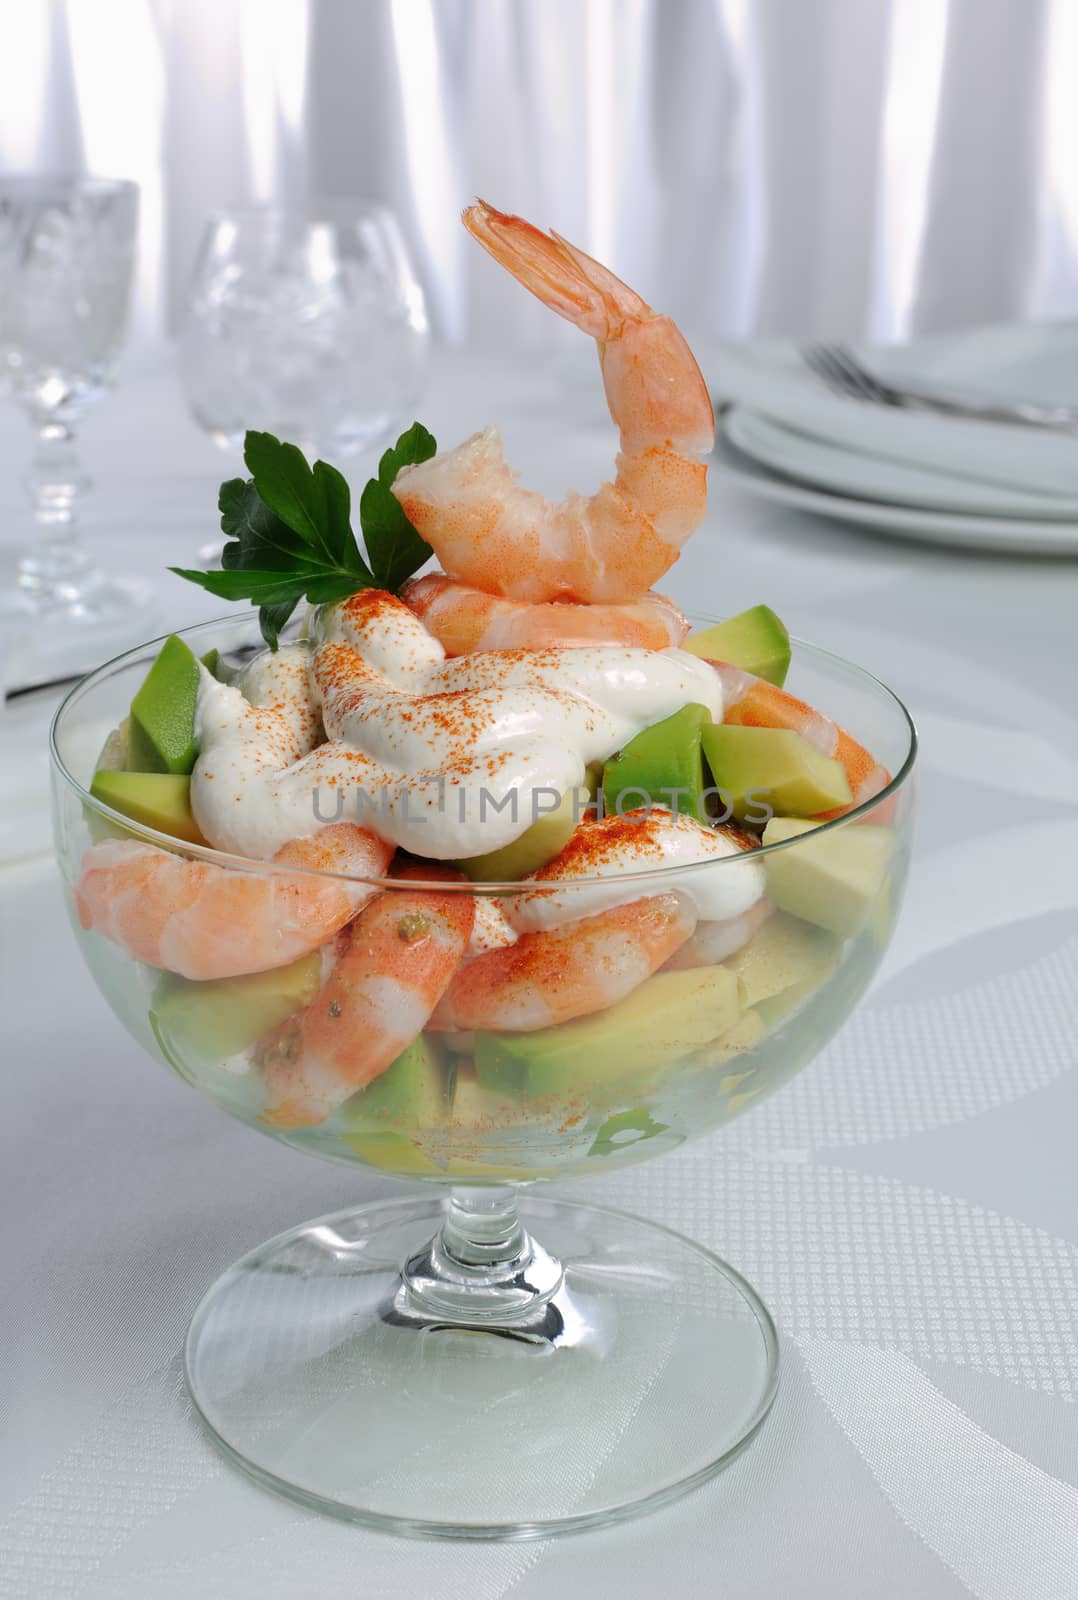 Shrimp with avocado yogurt and red pepper by Apolonia